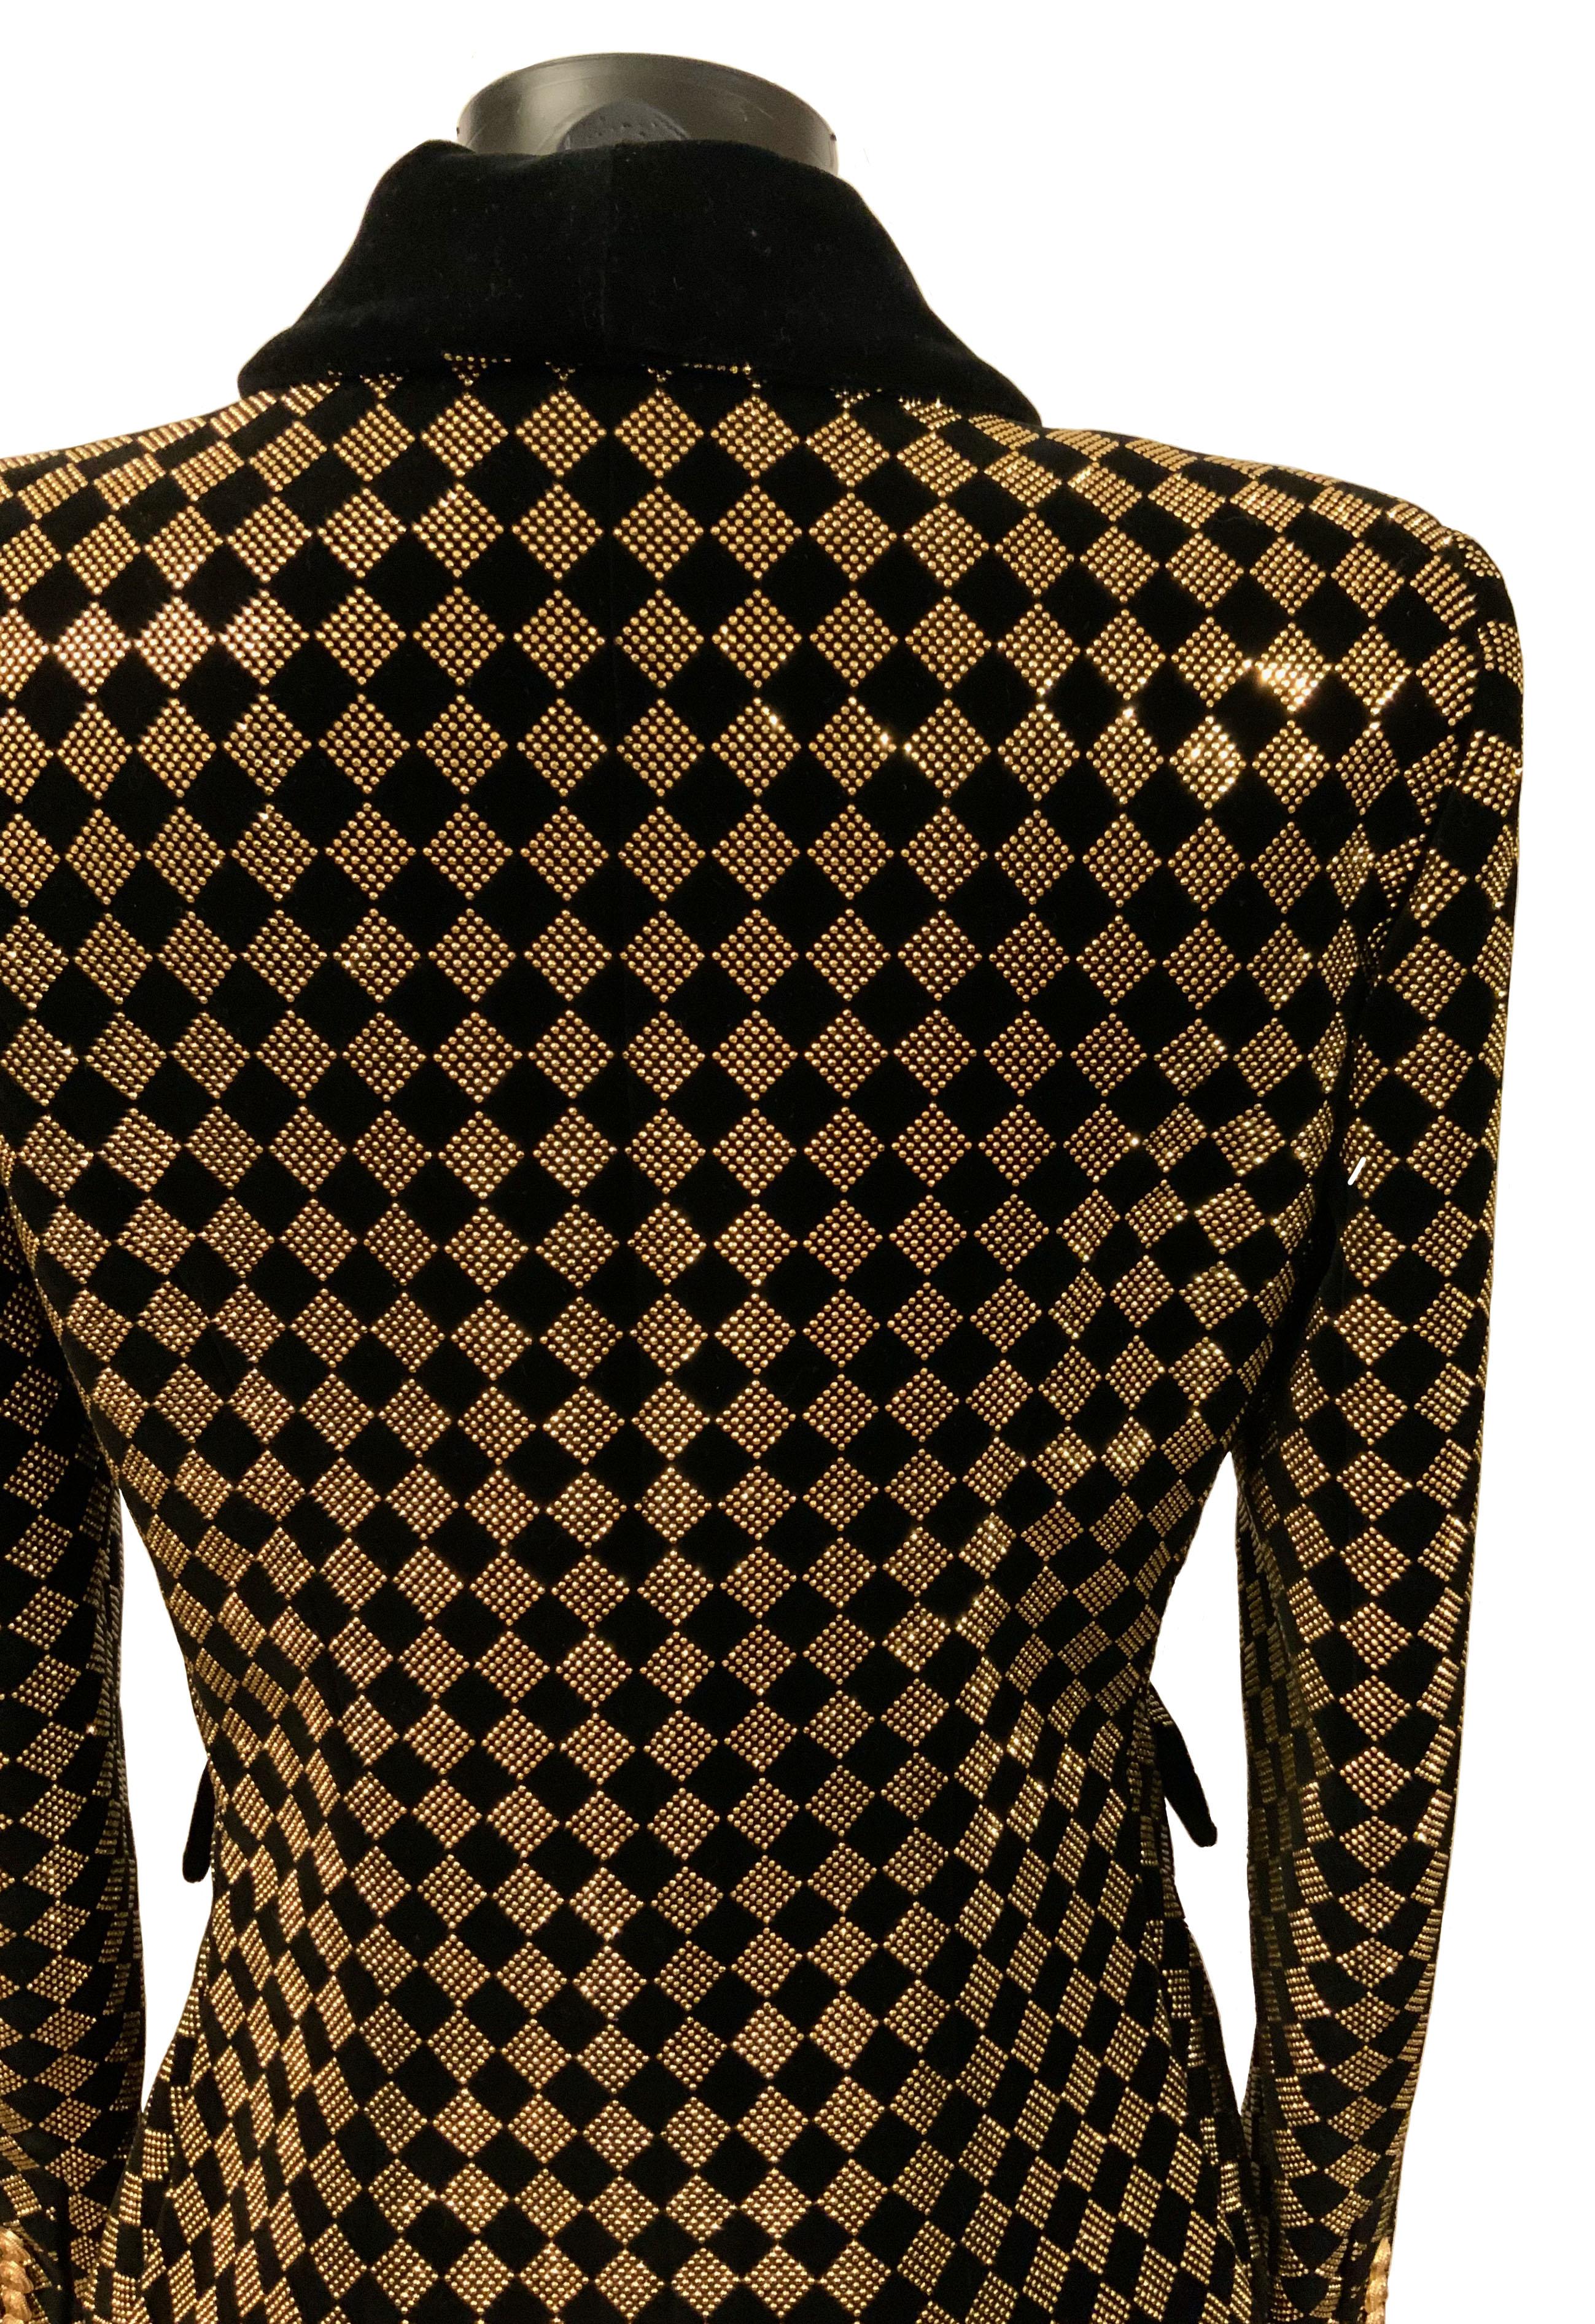 Balmain Black and Gold Tone Double-Breasted Blazer 2